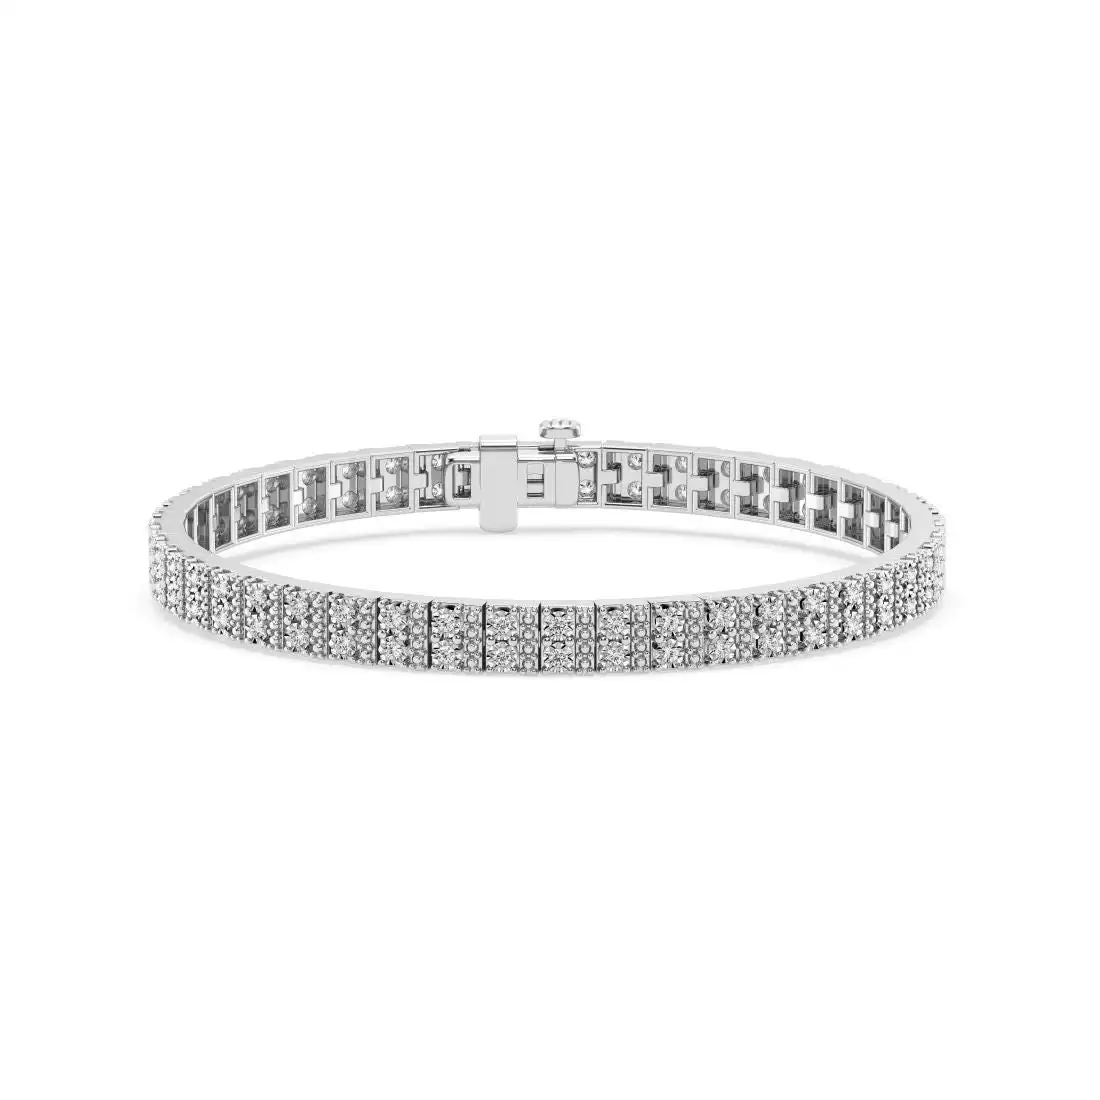 Mirage Multi Row Bracelet with 1.00ct of Laboratory Grown Diamonds in Sterling Silver and Platinum